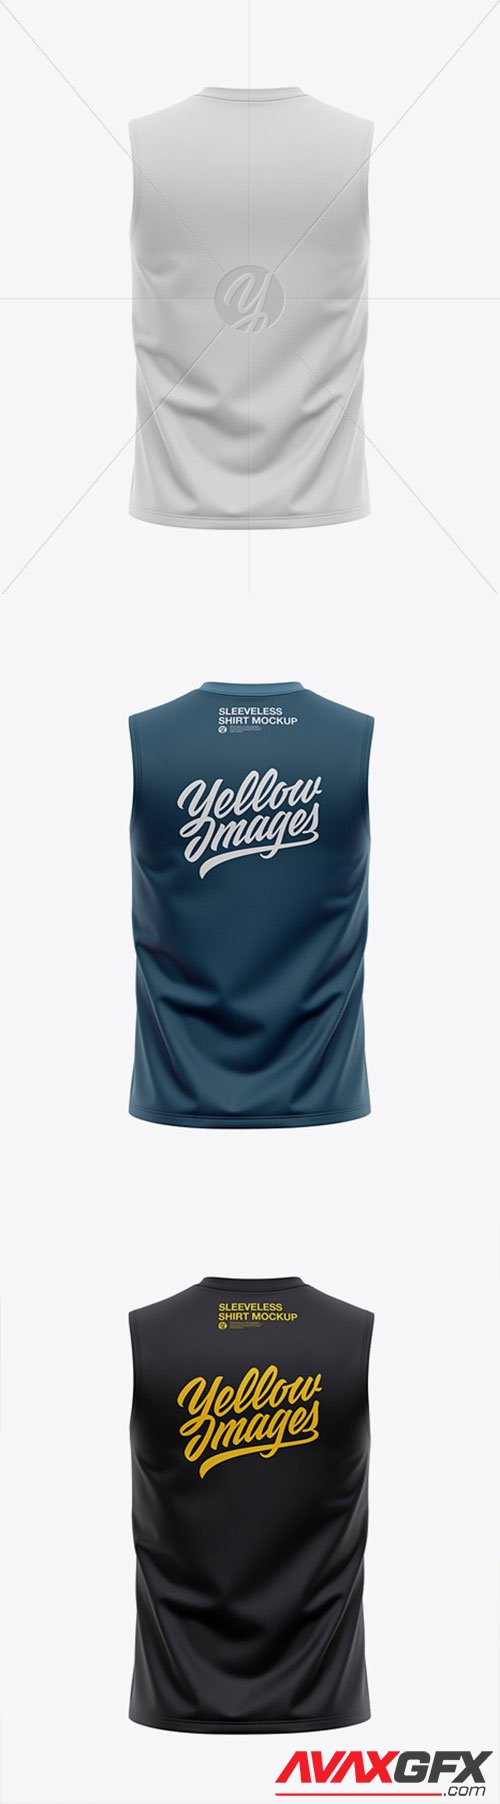 Download Men S Sleeveless Muscle Shirt Mockup 55592 Avaxgfx All Downloads That You Need In One Place Graphic From Nitroflare Rapidgator